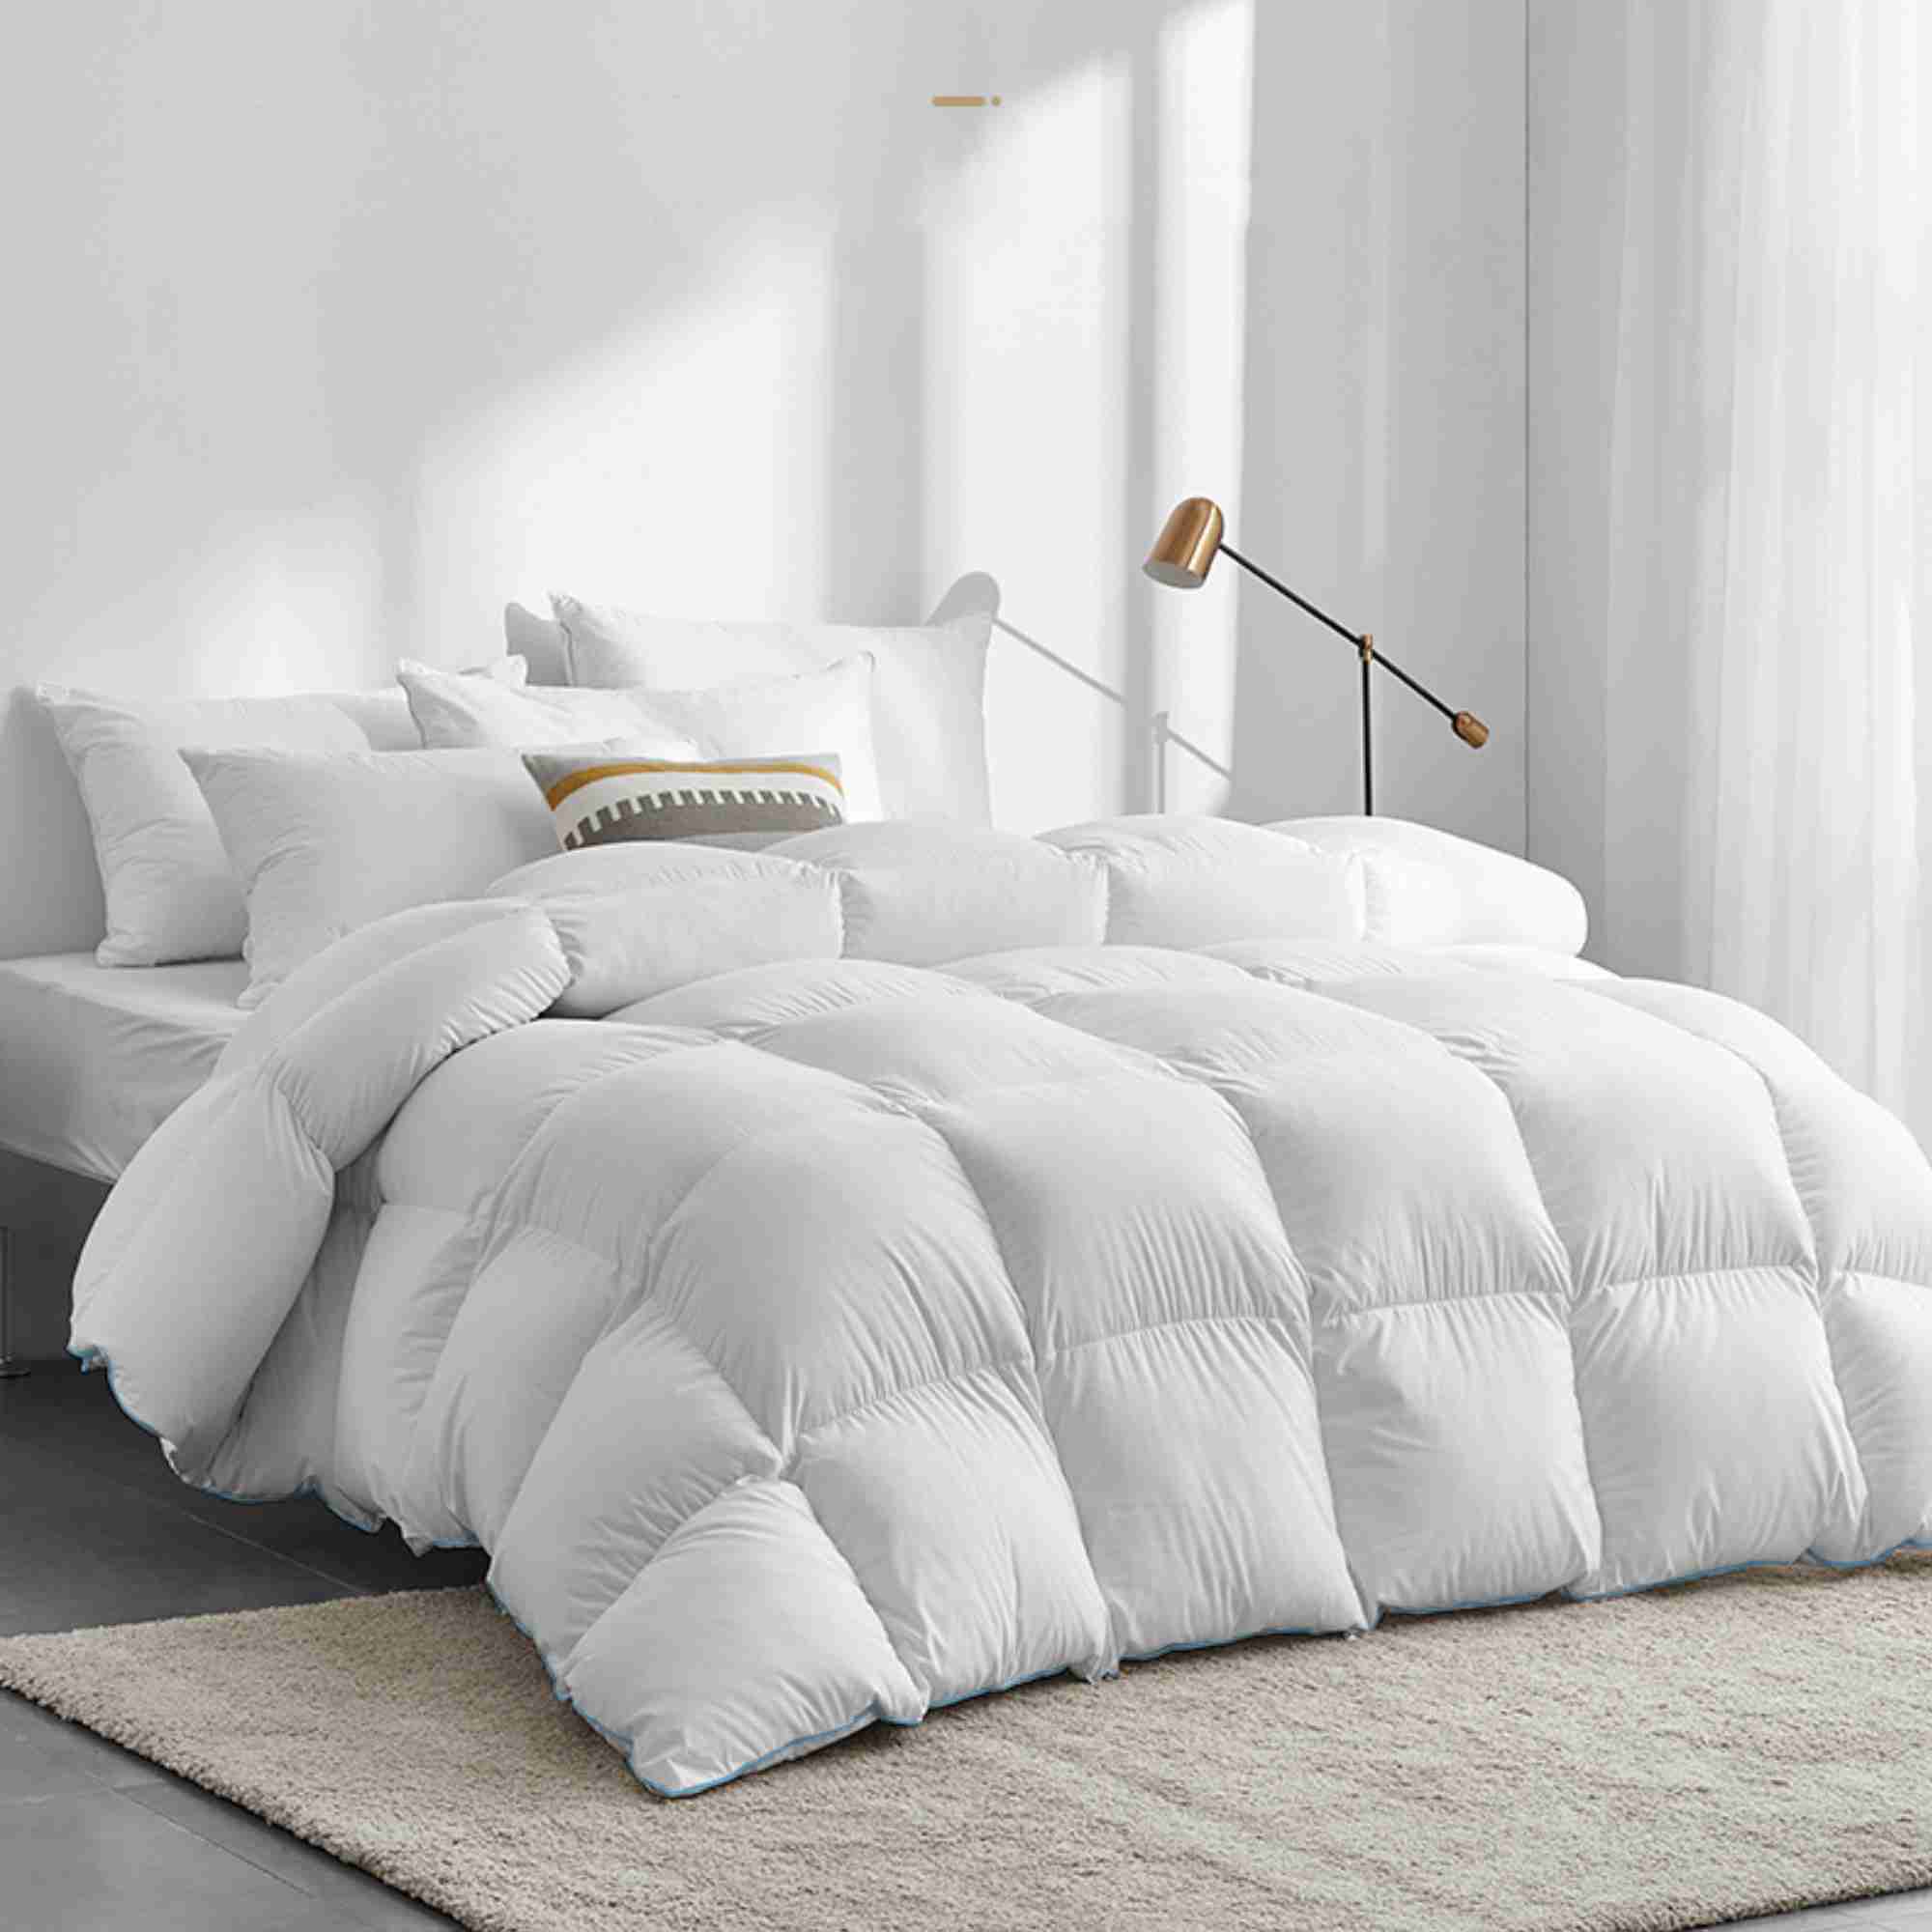 heavyweight-feather-down-comforter-queen-hotel-collection for cheap